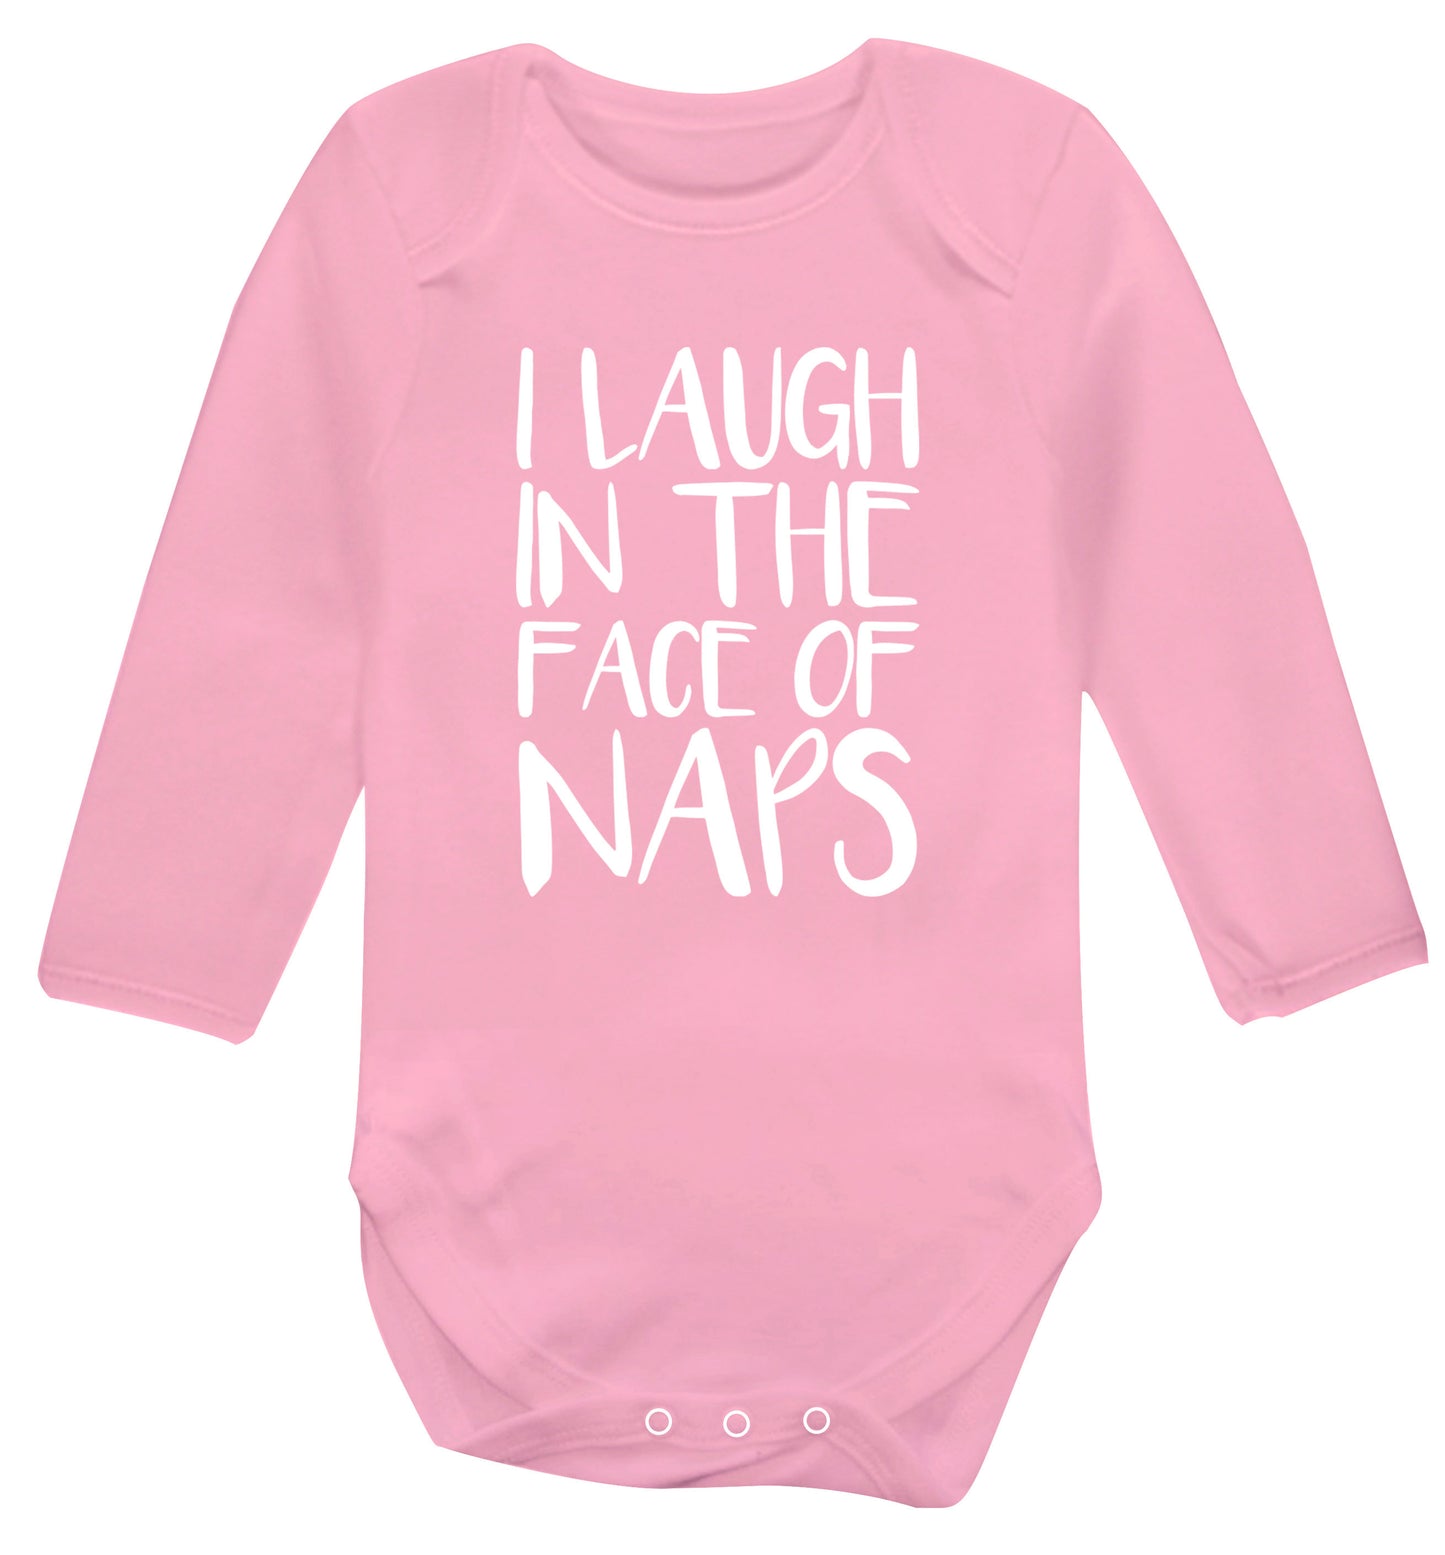 I laugh in the face of naps Baby Vest long sleeved pale pink 6-12 months